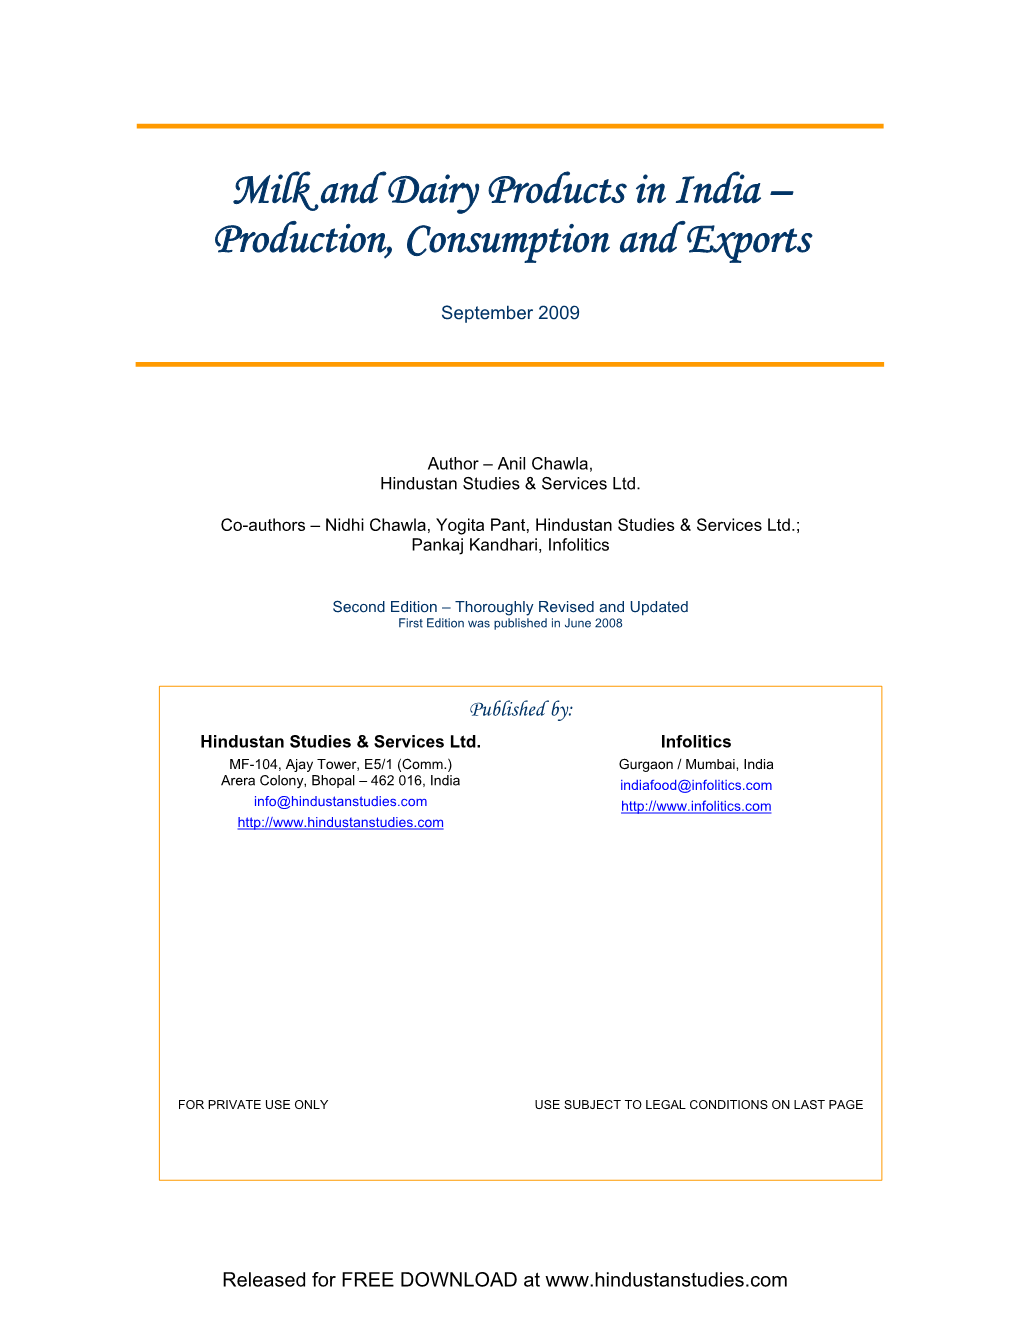 Milk & Dairy Products in India